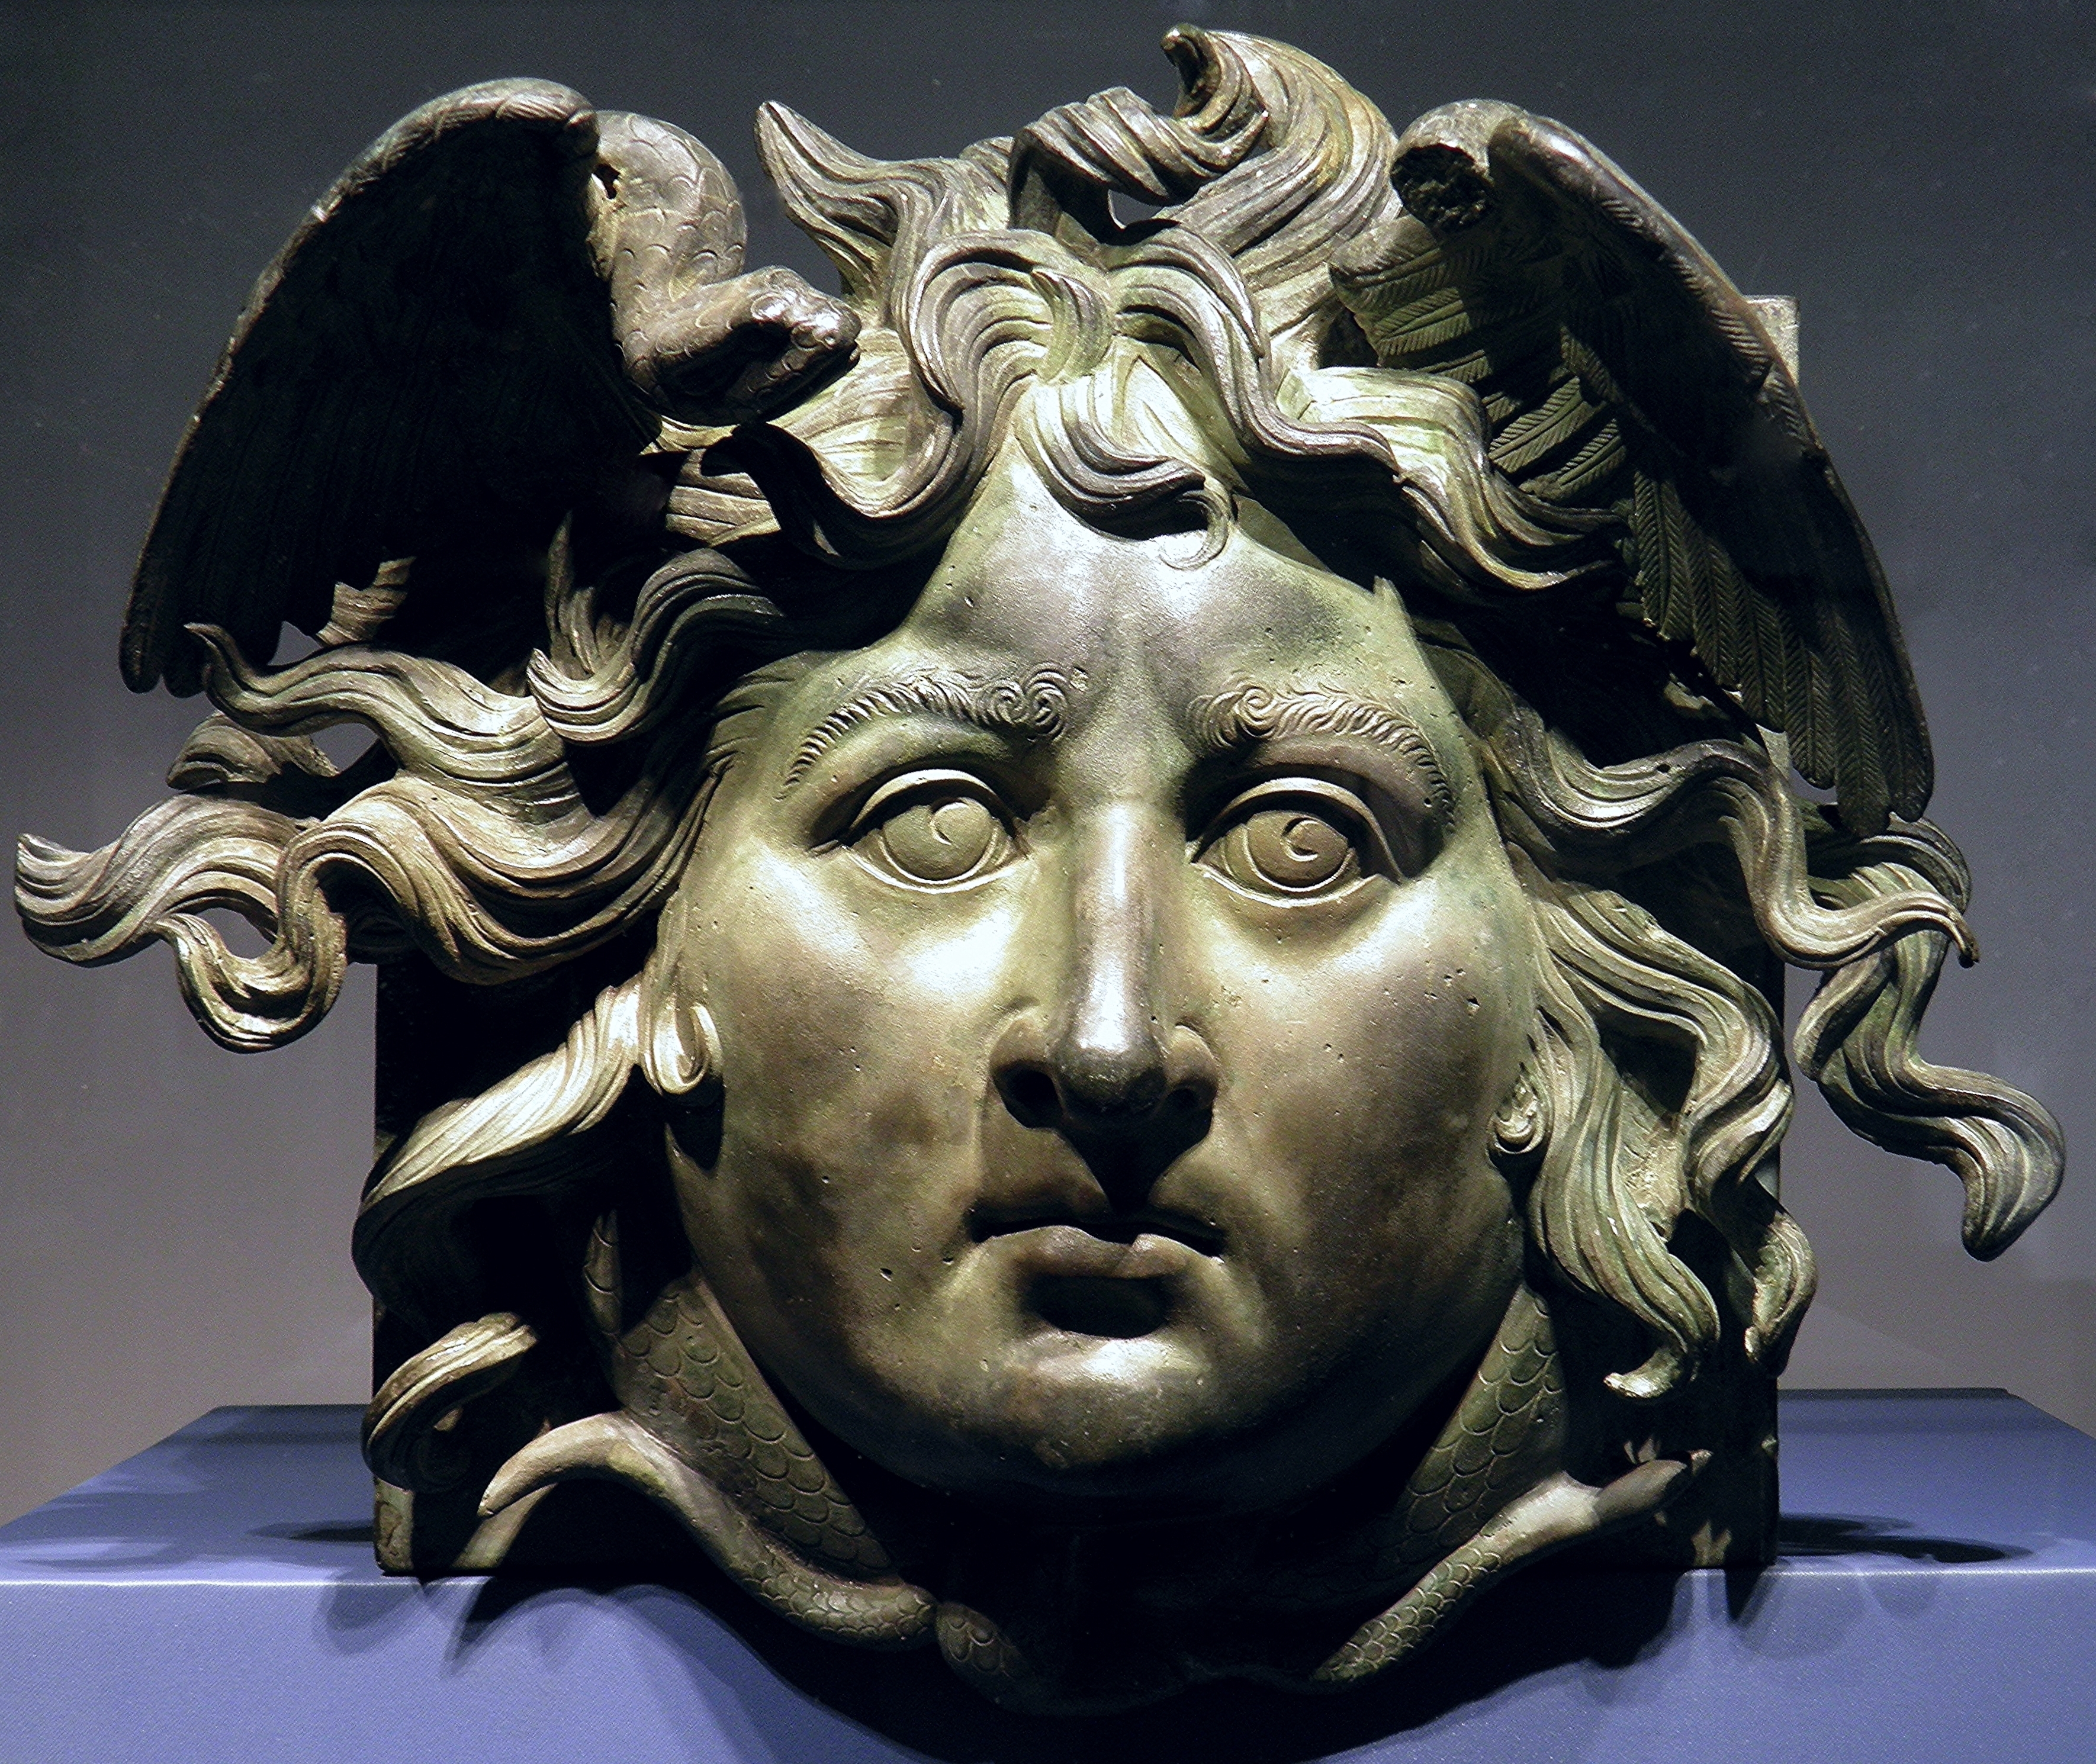 What sin did Medusa do?